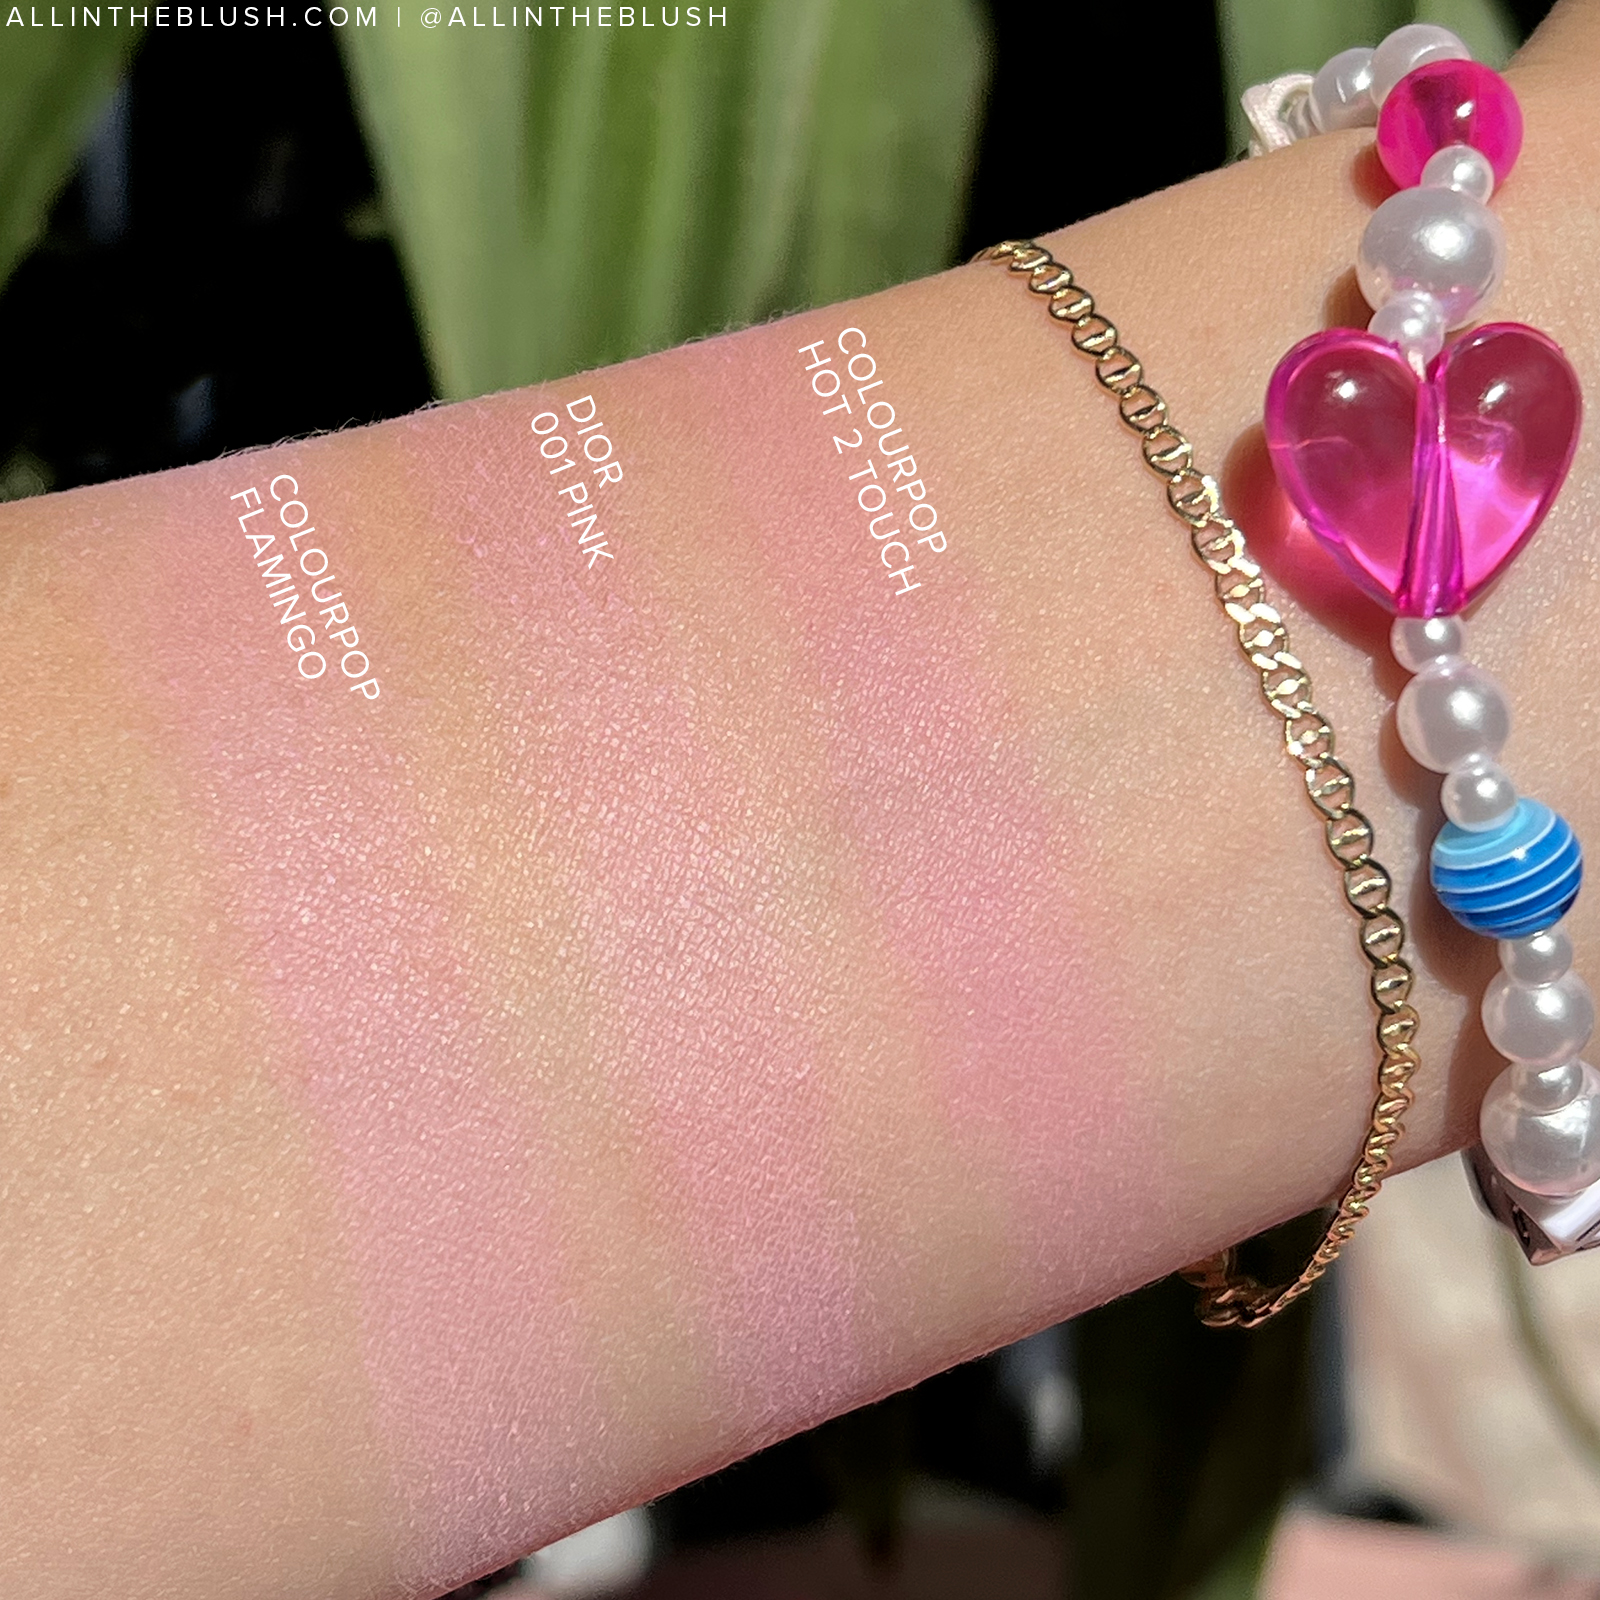 Periodiek Dageraad ballet ColourPop Dupes for Dior 001 Pink Rosy Glow Blush - All In The Blush